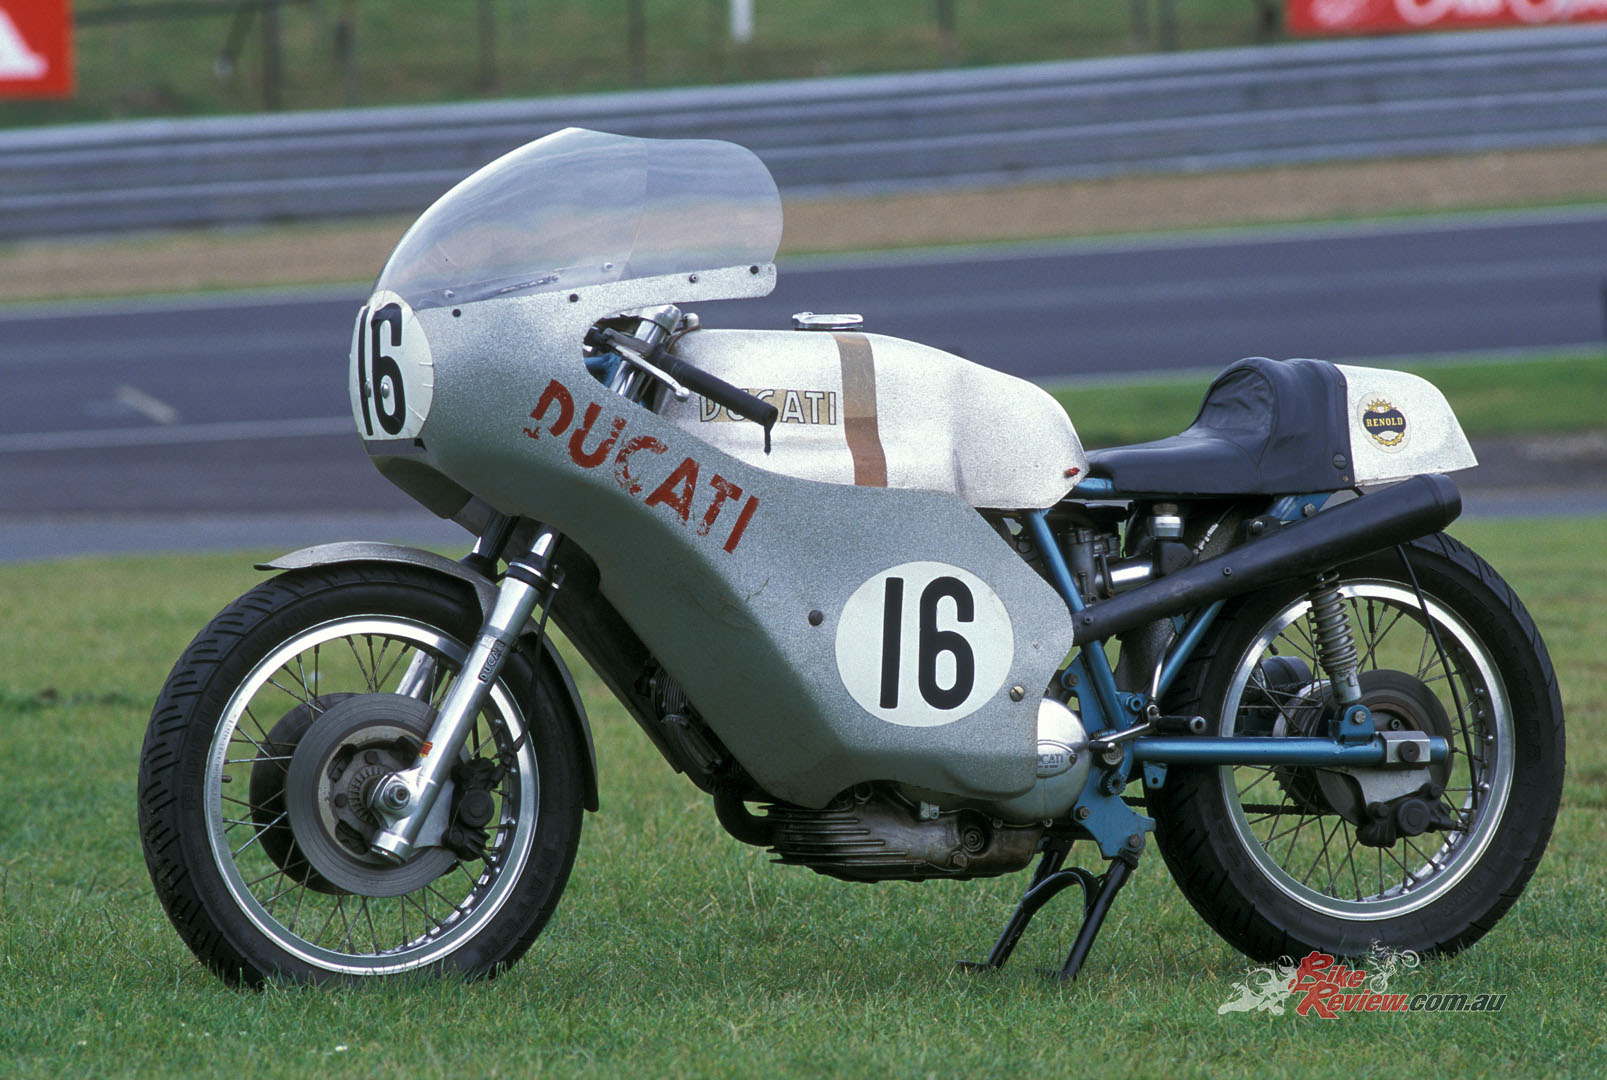 The bike was deceptively quick, one spin out in testing and Smart had already broken the great Agostini's record lap time.